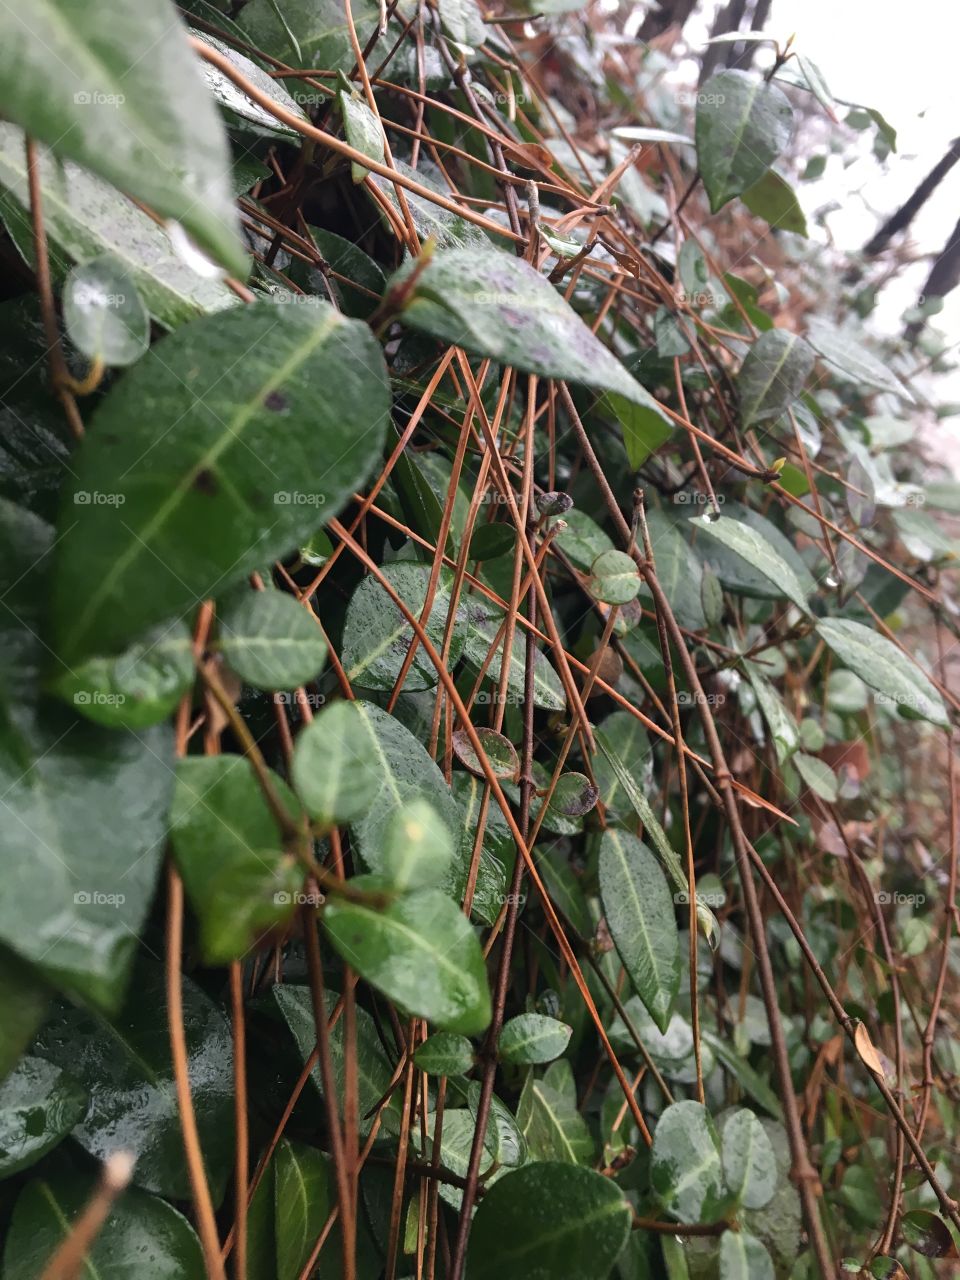 vines on a cloudy day 